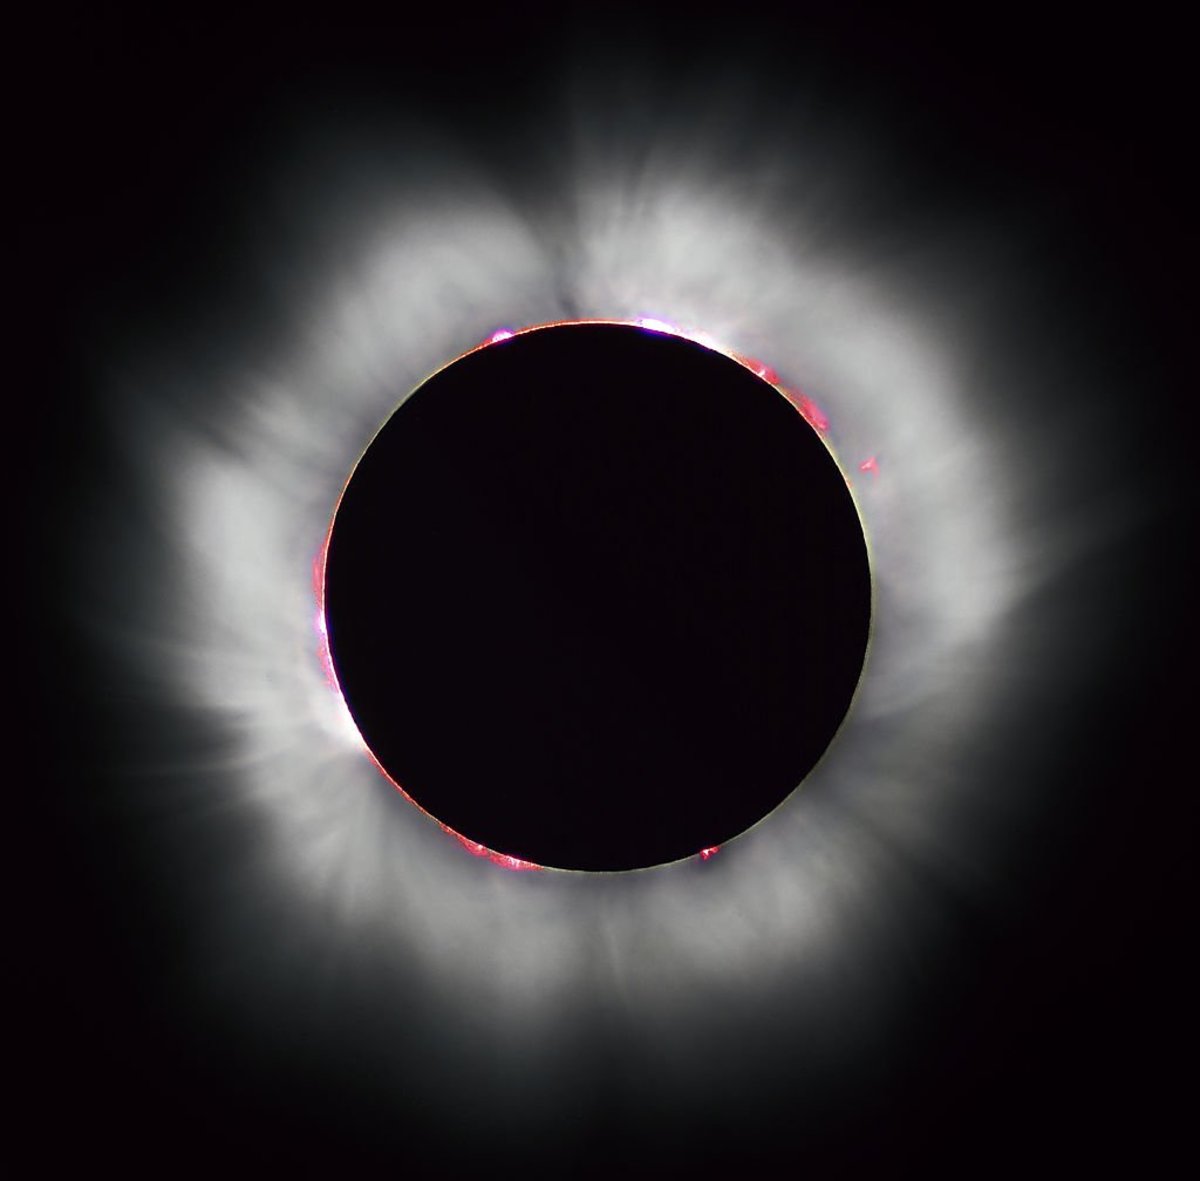 Photographing a Solar Eclipse Safely